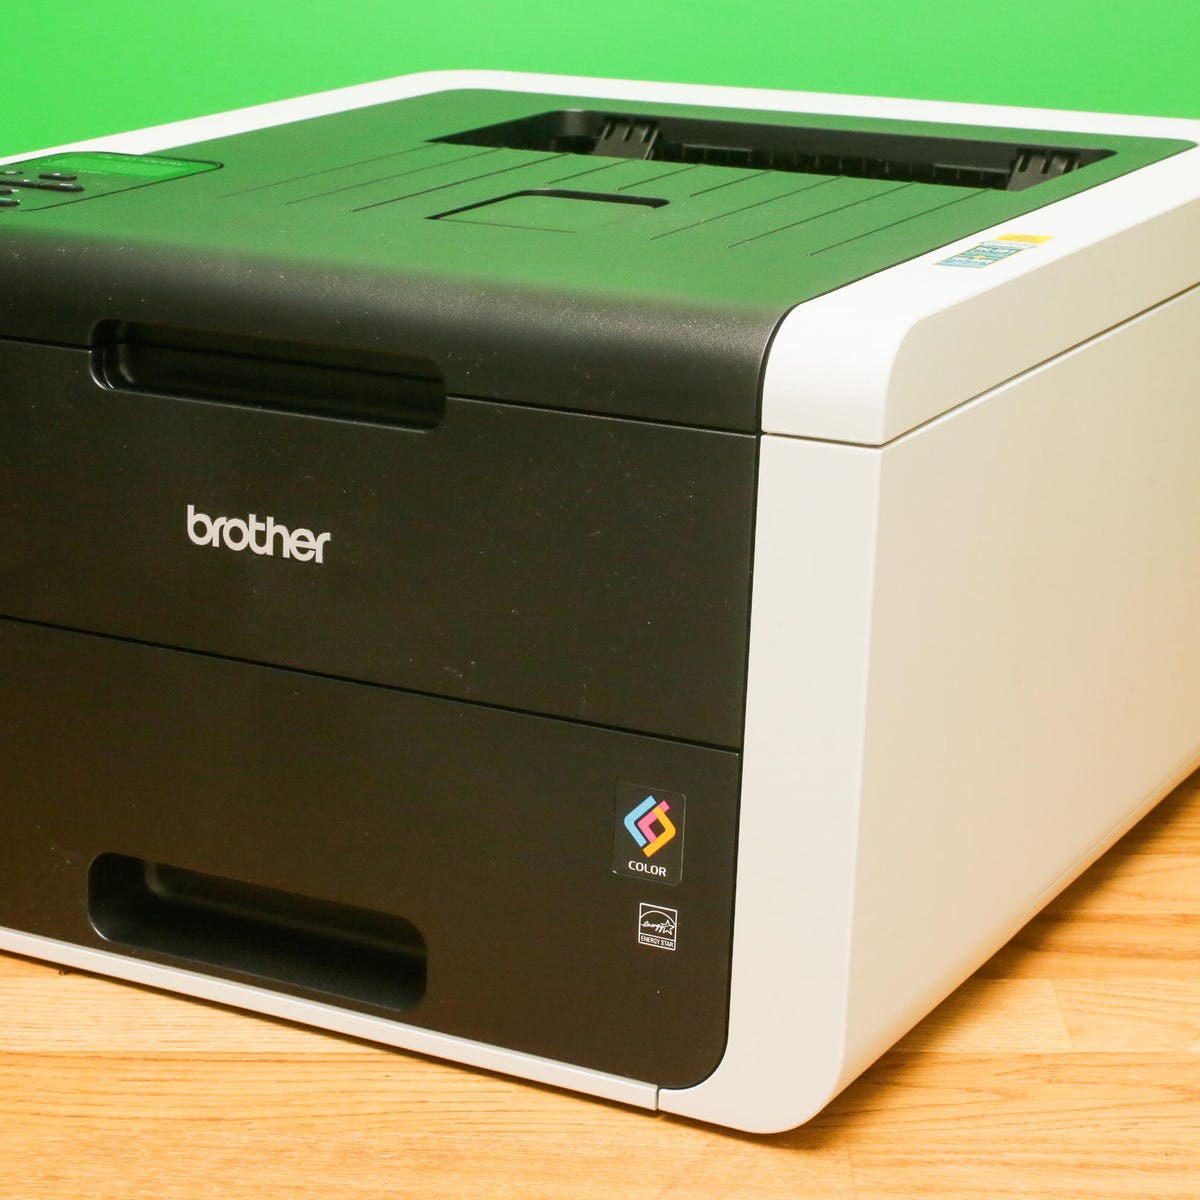 mave landsby Generator Brother HL-3170CDW review: A cheap and charming color laser printer - CNET